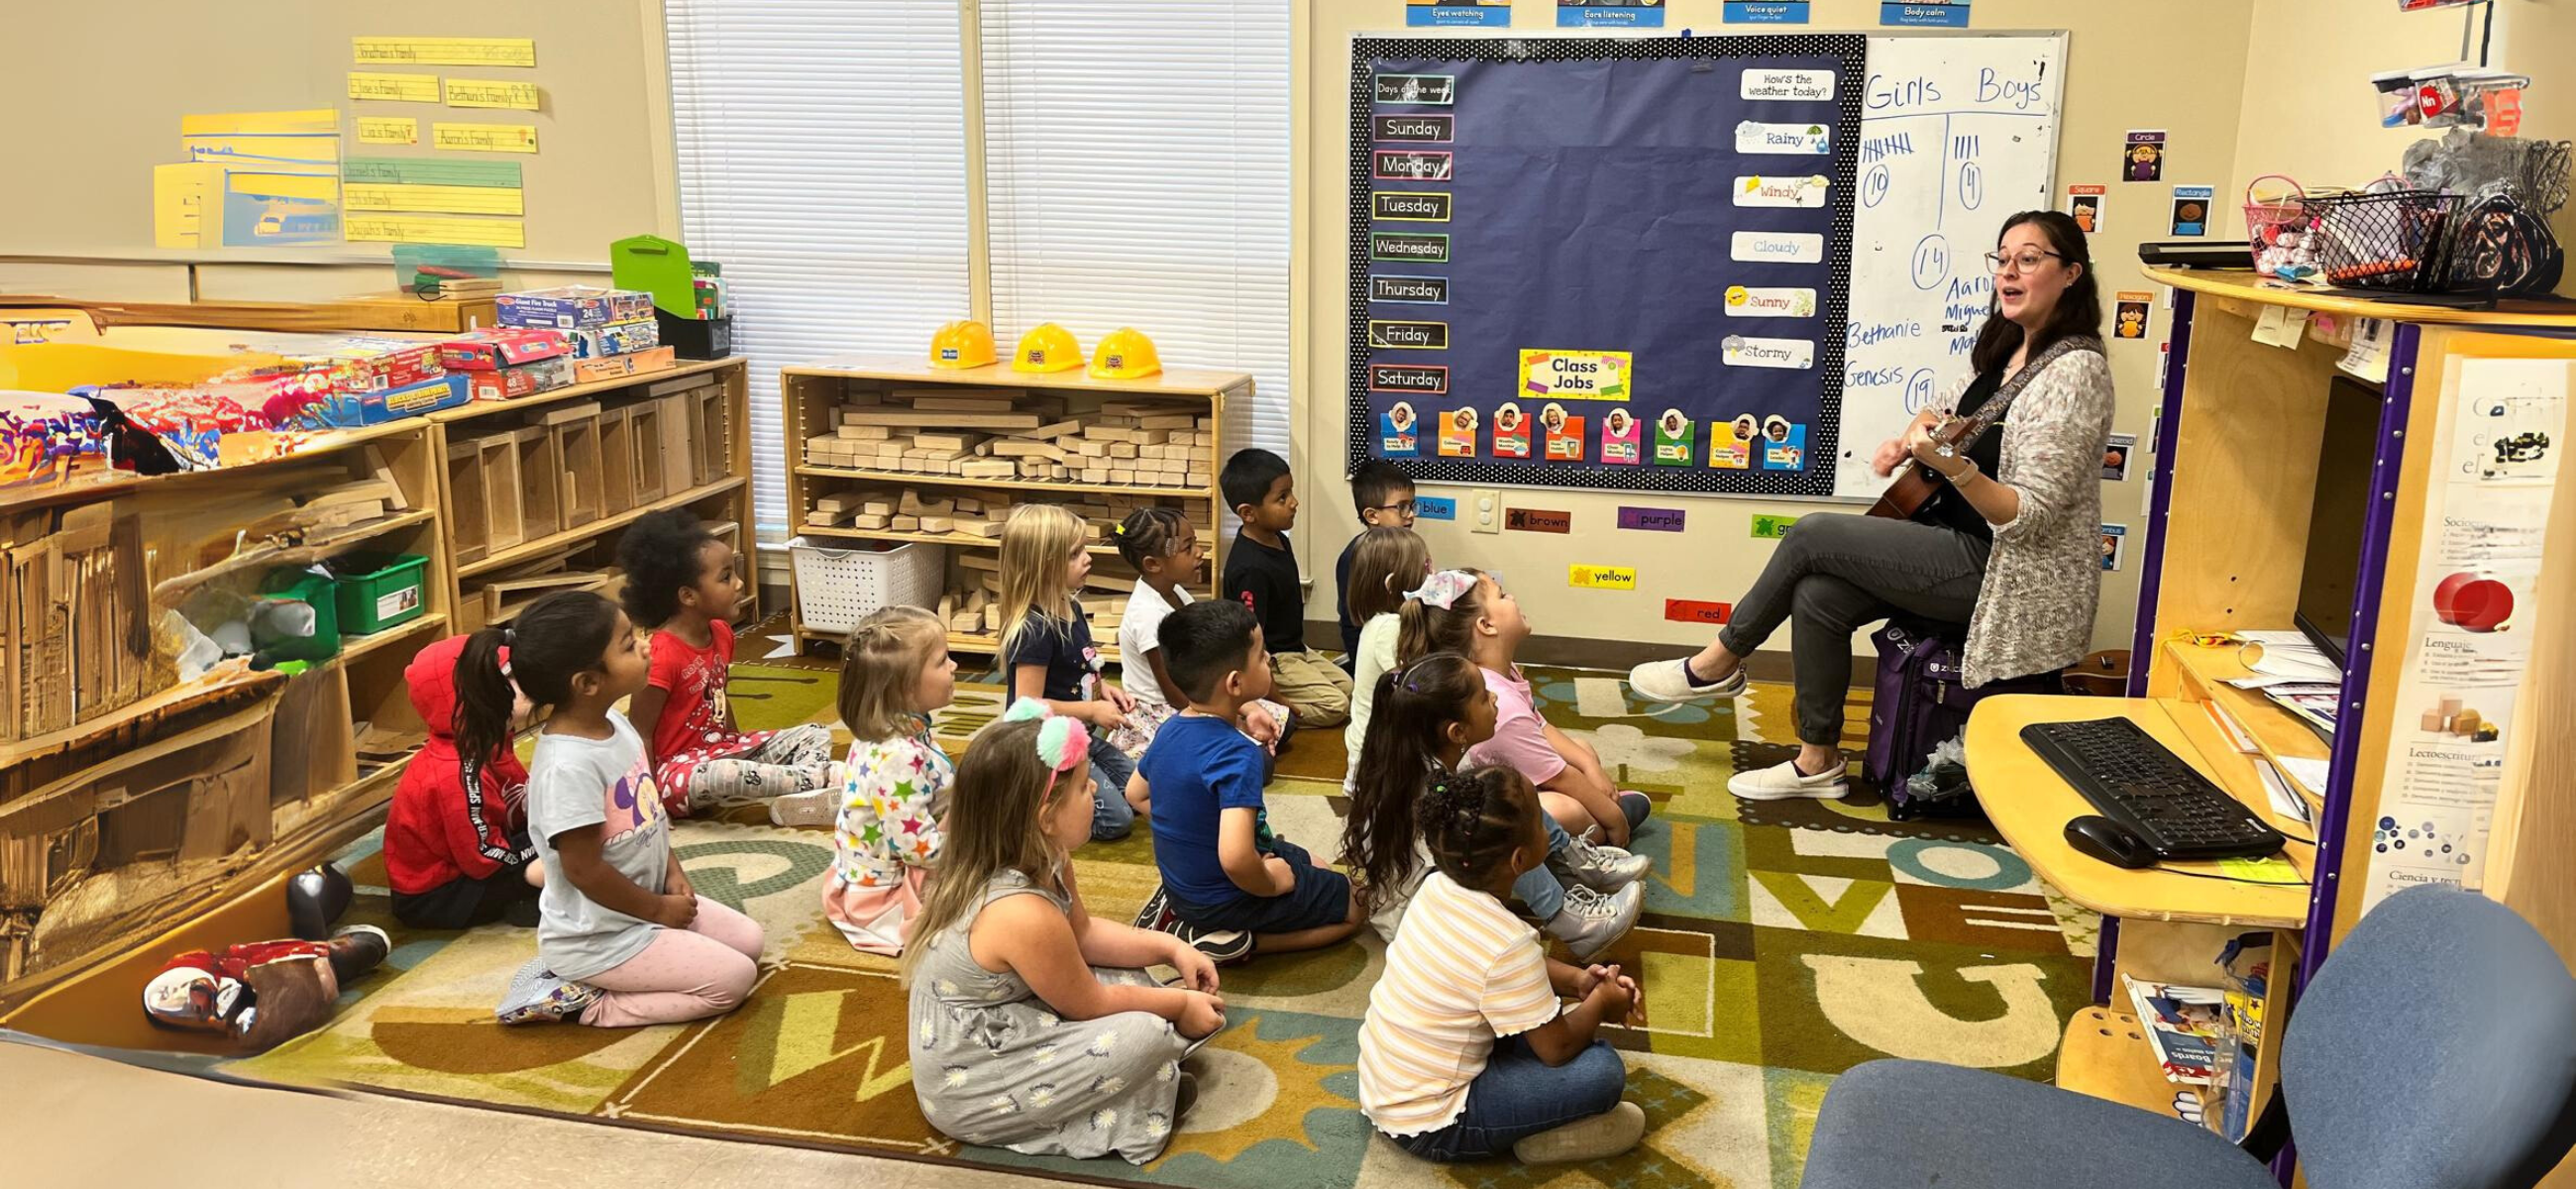 A teacher plays guitar and sings to Pre-K students at a child care center in north Georgia.